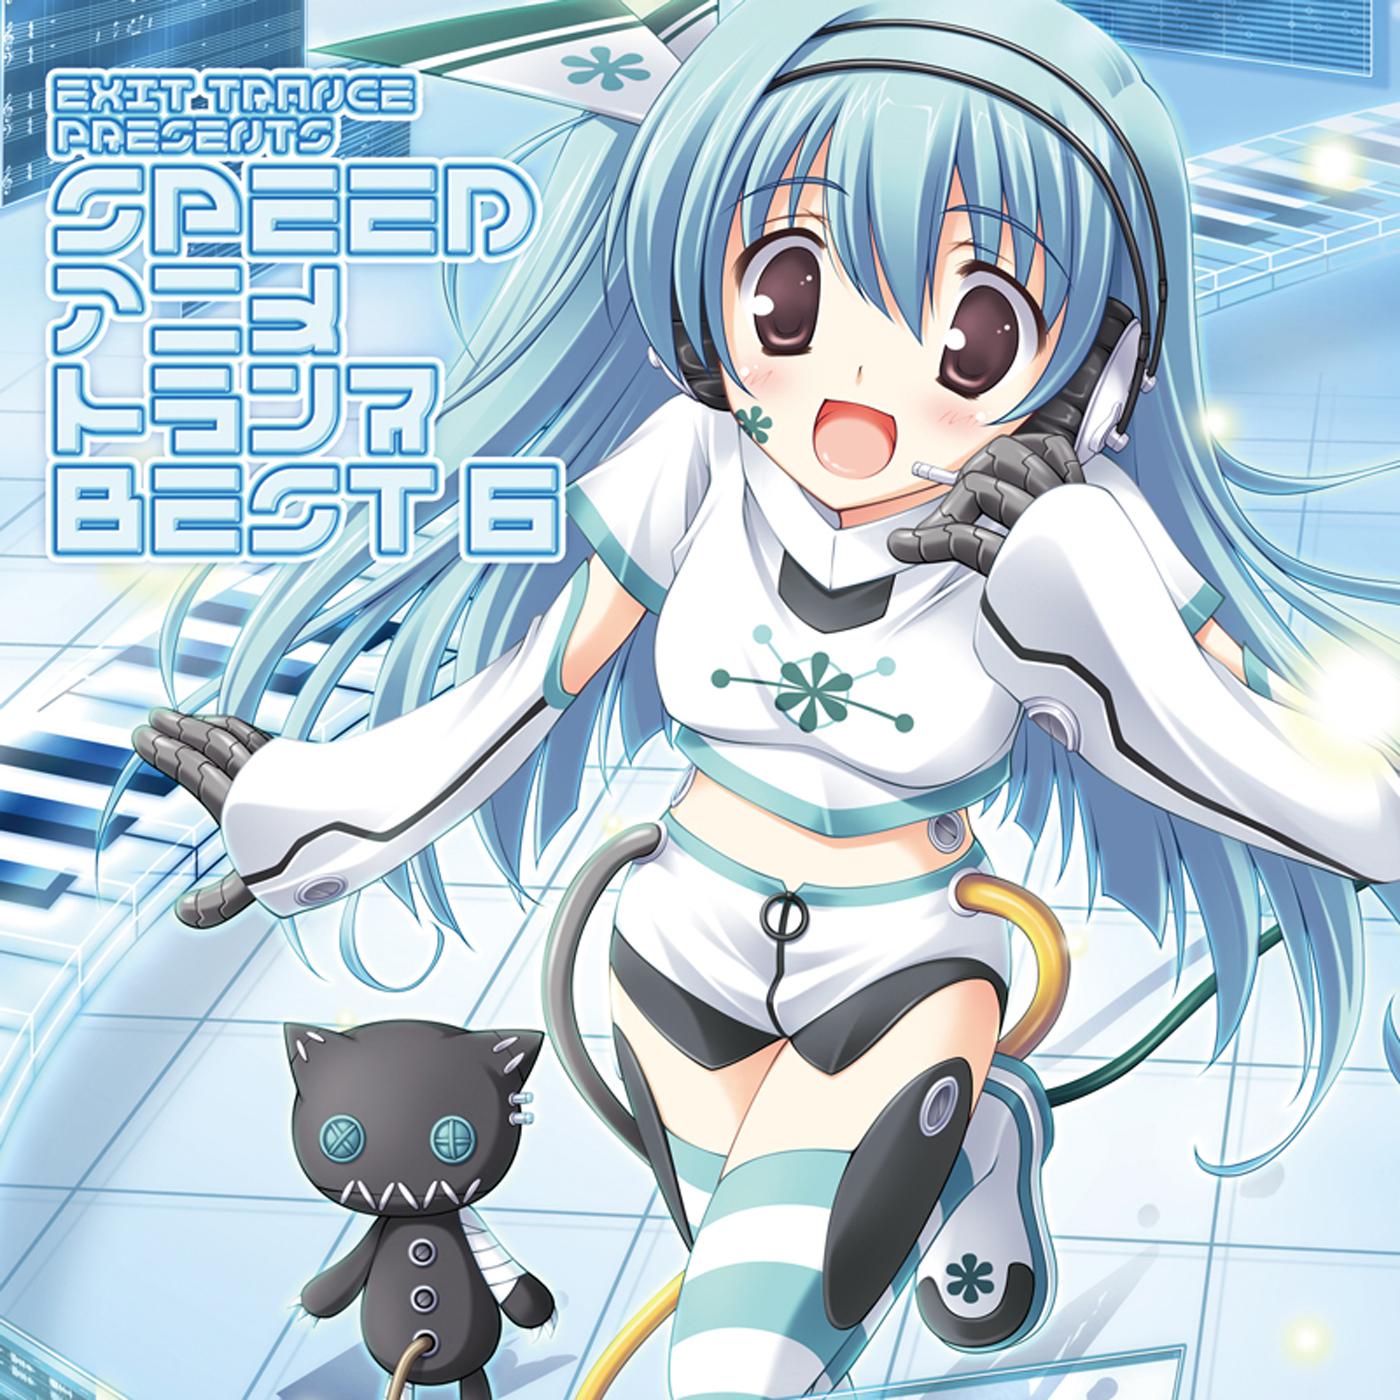 EXIT TRANCE PRESENTS SPEED アニメトランス BEST 6专辑